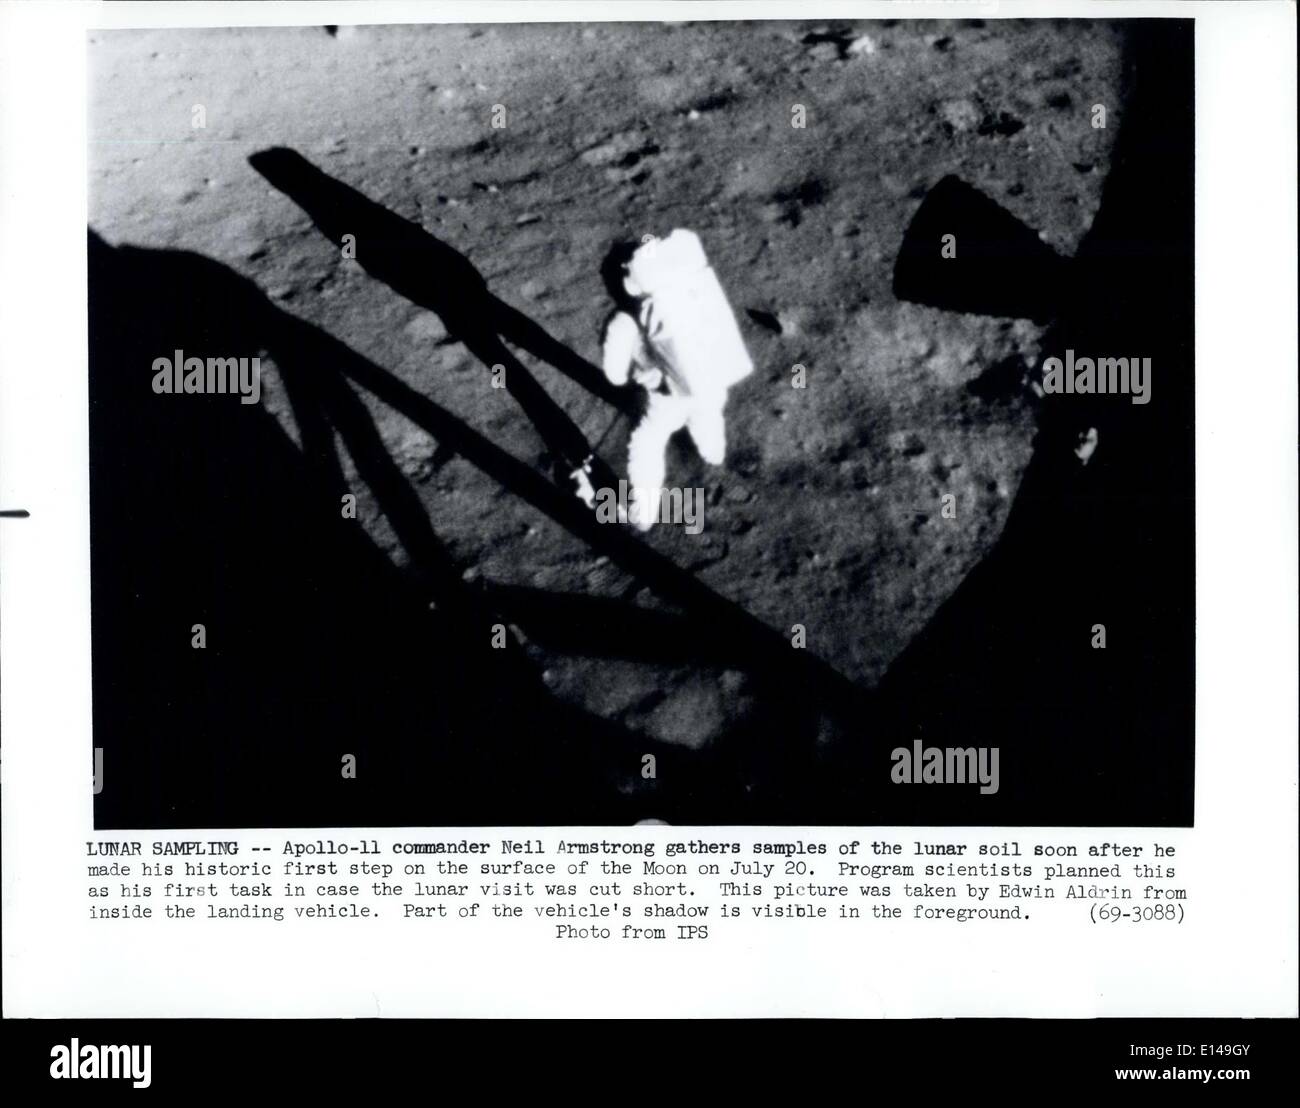 Apr. 17, 2012 - Lunar Sampling: Apollo 11 commander Neil Armstrong gathers samples of the lunar soil soon after he made his historic first step on the surface of the Moon on July 20. Program scientists planned this as his first task in case the lunar visit was cut short. Photo Shows was taken by Edwin Aldrin from inside the landing vehicle. Part of the vehicle's shadow is visible in the foreground. Stock Photo